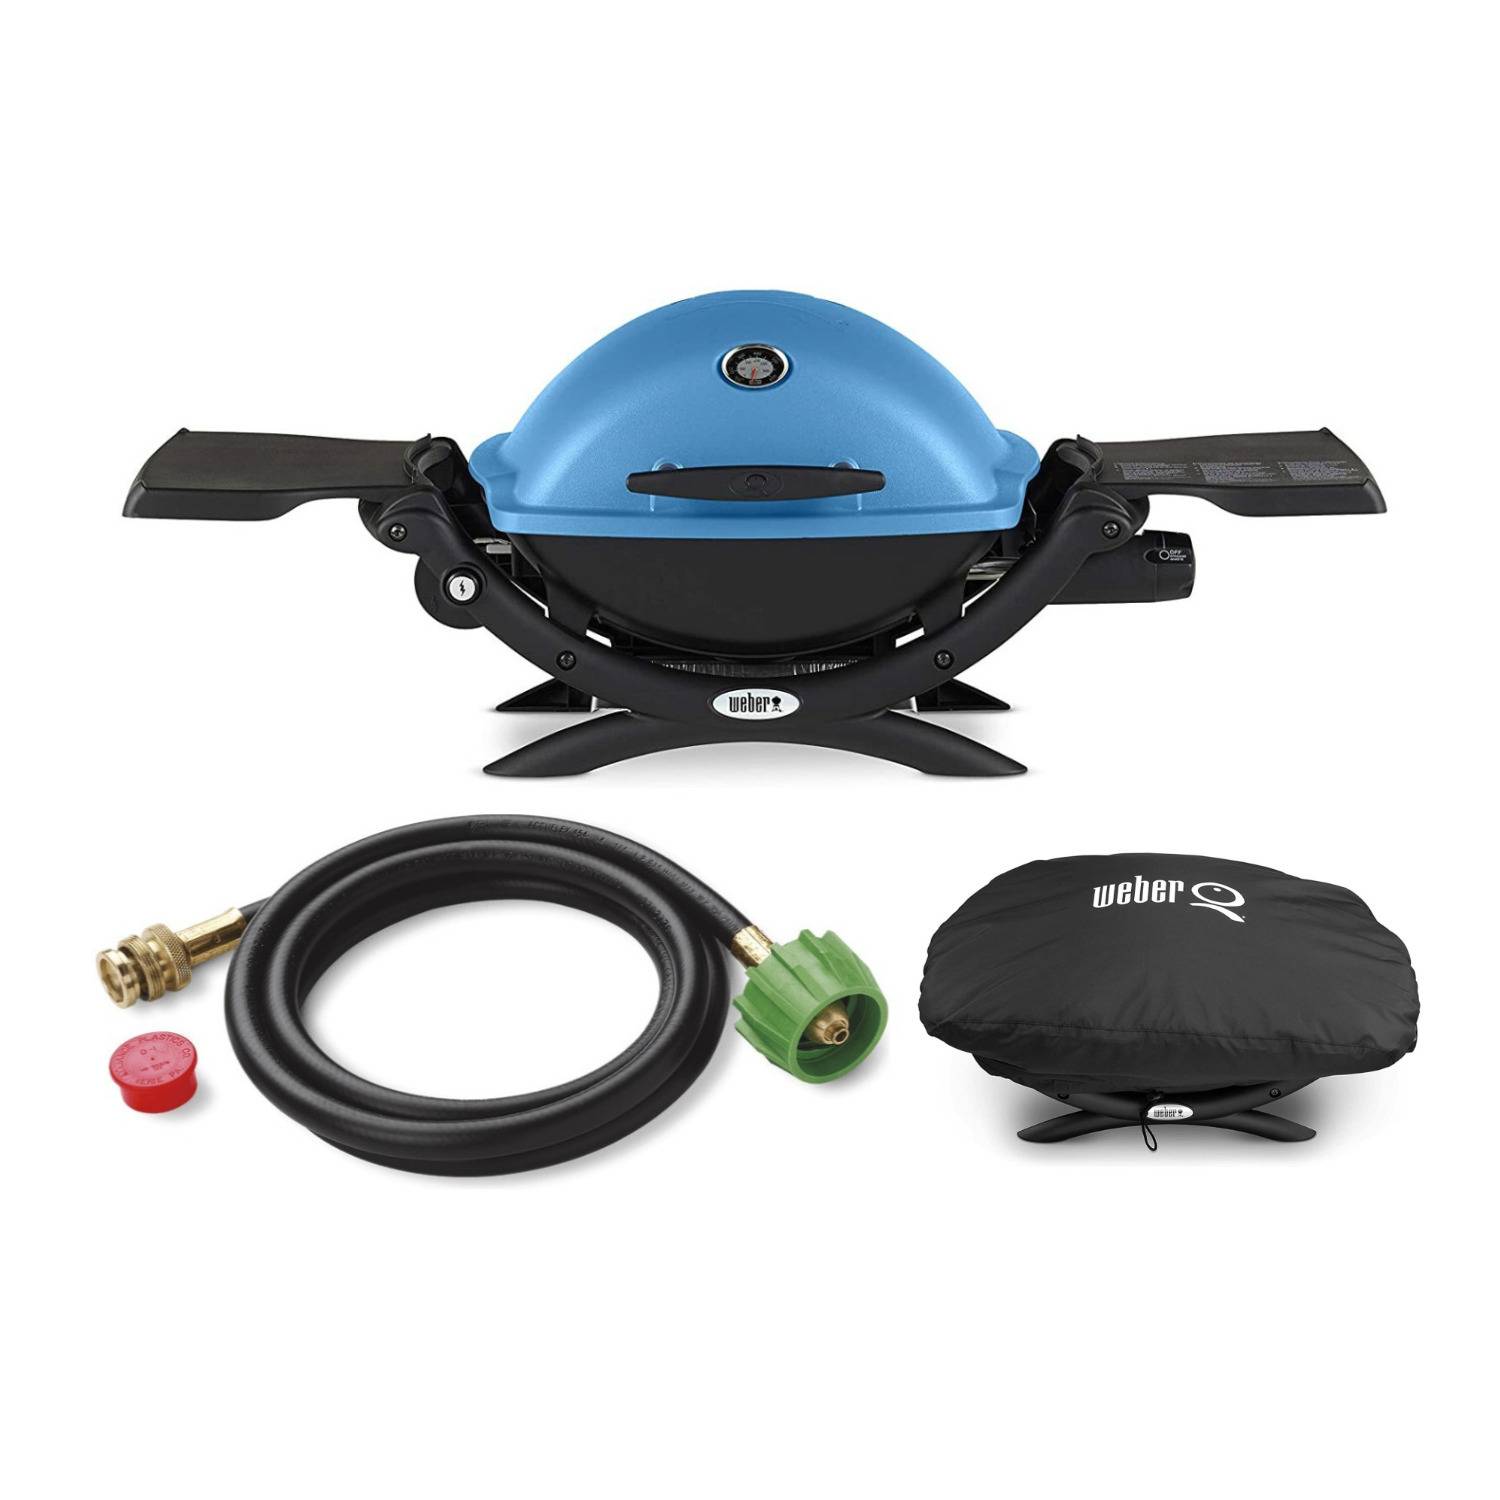 Weber Q 1200 Liquid Propane Grill (Blue) with Adapter Hose and Cover